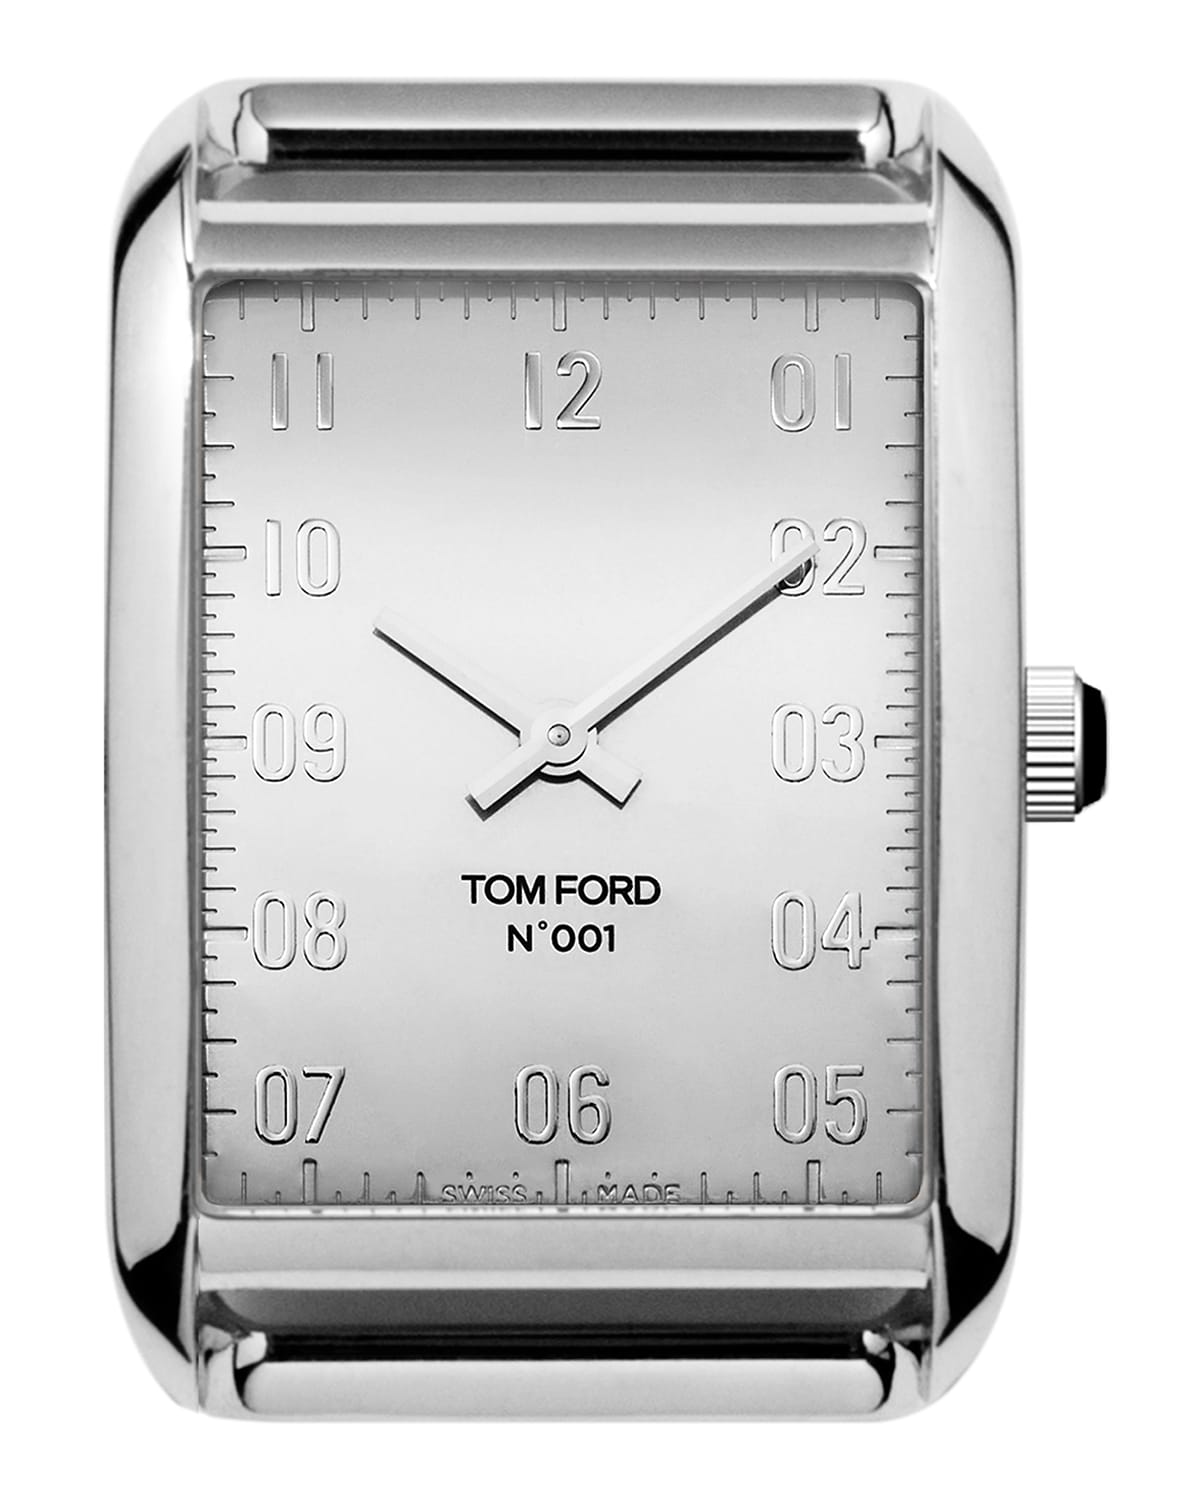 Tom Ford N.001 44 X 30mm Stainless Steel Watch Case